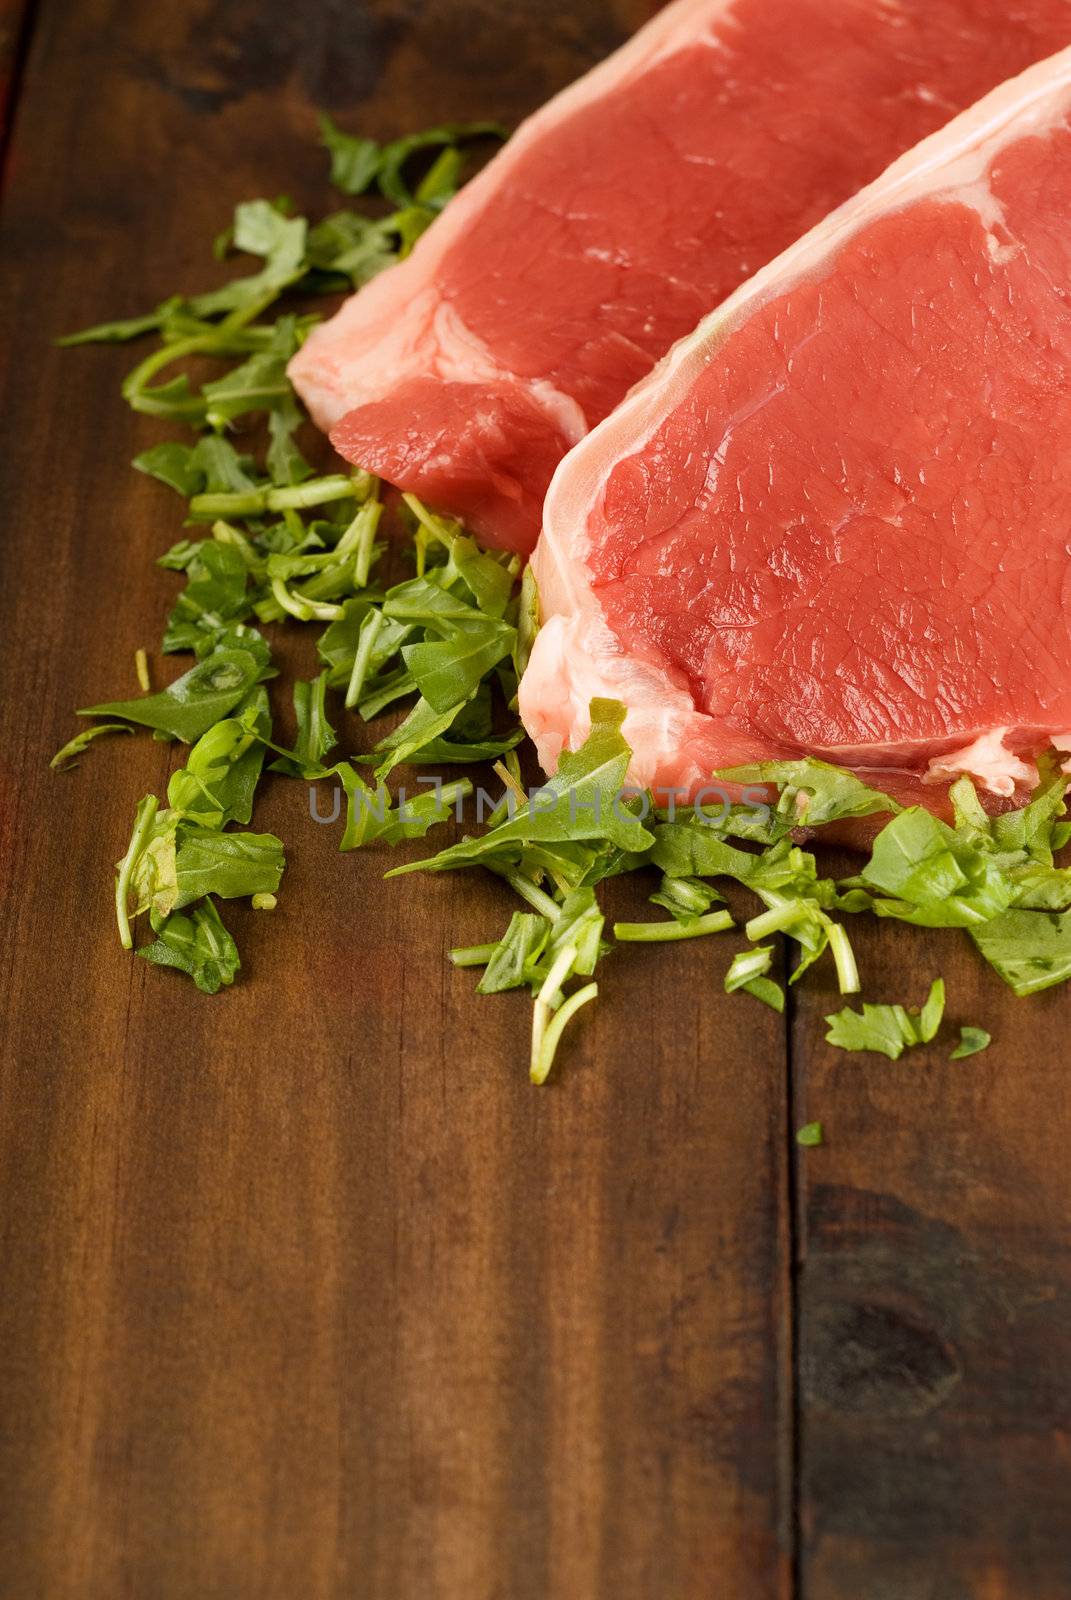 Fresh raw beef meat steak with herbs on wooden table or cutting board